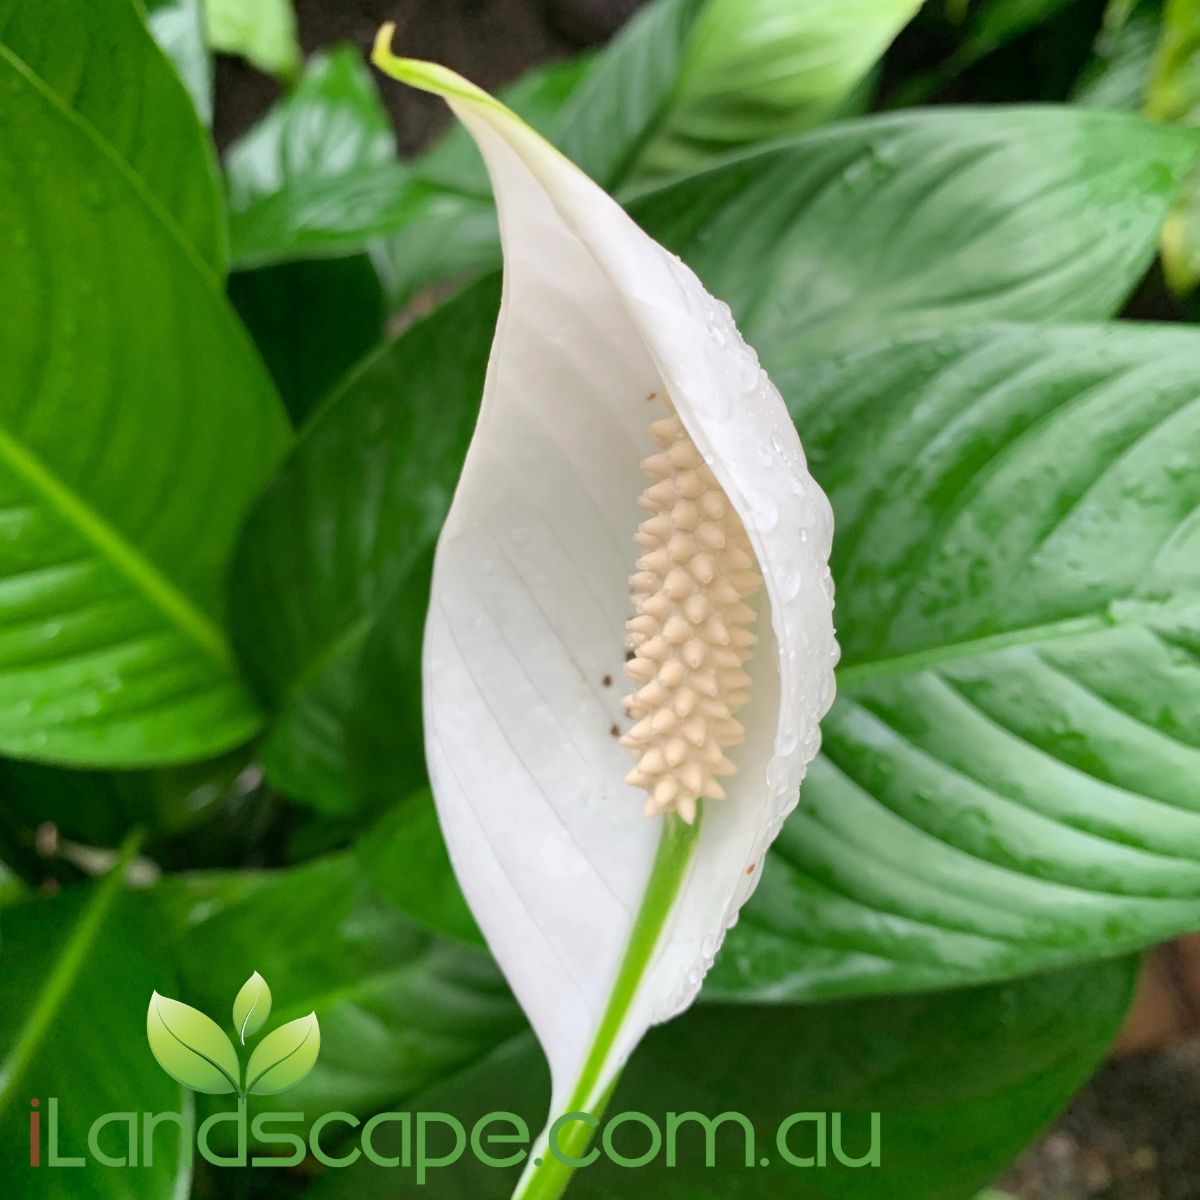 Spathiphyllum mojo is a more compact form of Peace Lily and has evergreen deep green foliage and produced prolific amounts of smaller pure whit flowers. makes an excellent specimen or table indoor plant 